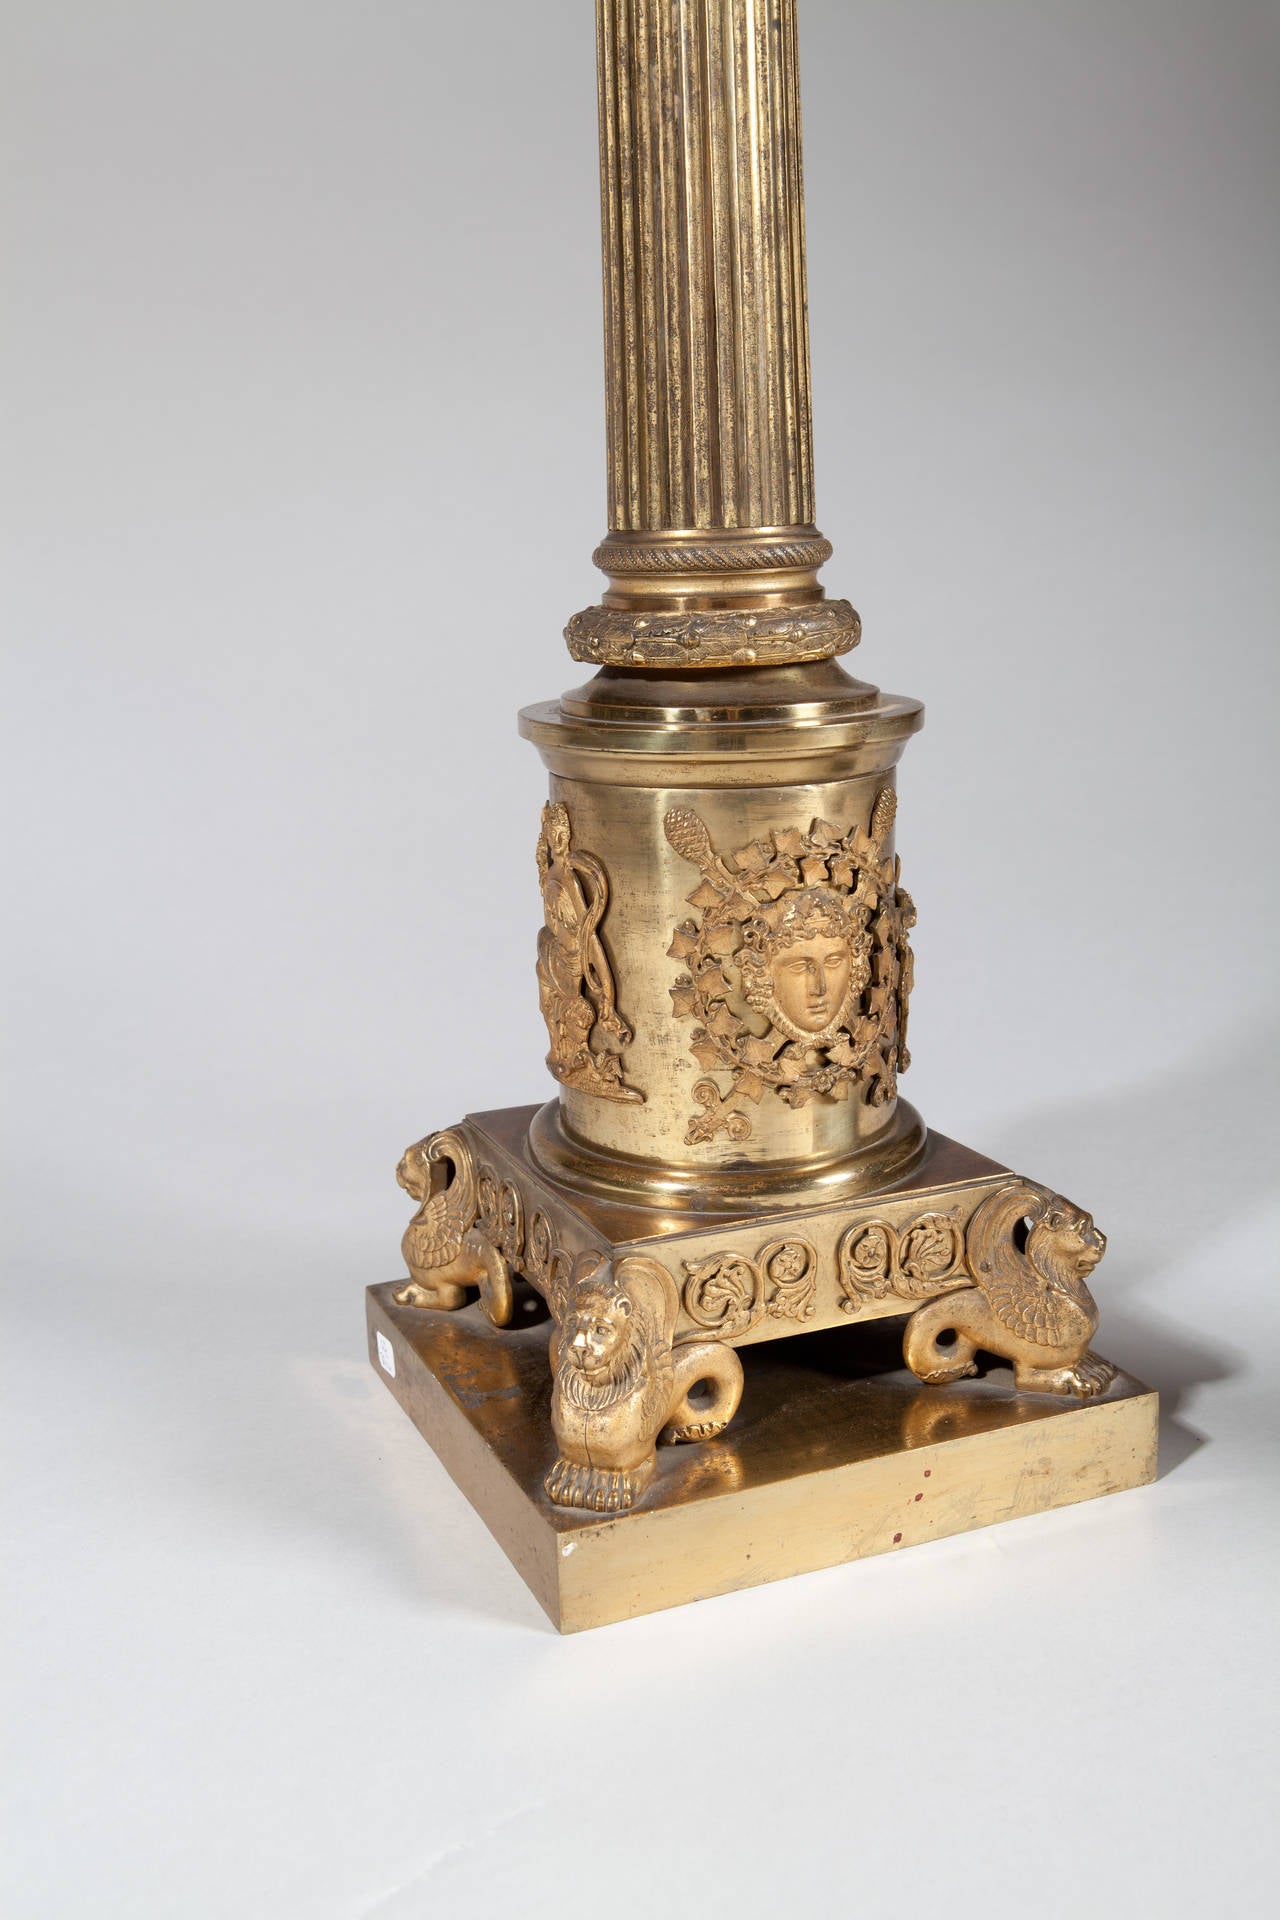 An exceptional pair of monumental gilt bronze column lamps, each with fluted columns, finely chased Corinthian capitals and applied classical masks and mounts to the base.